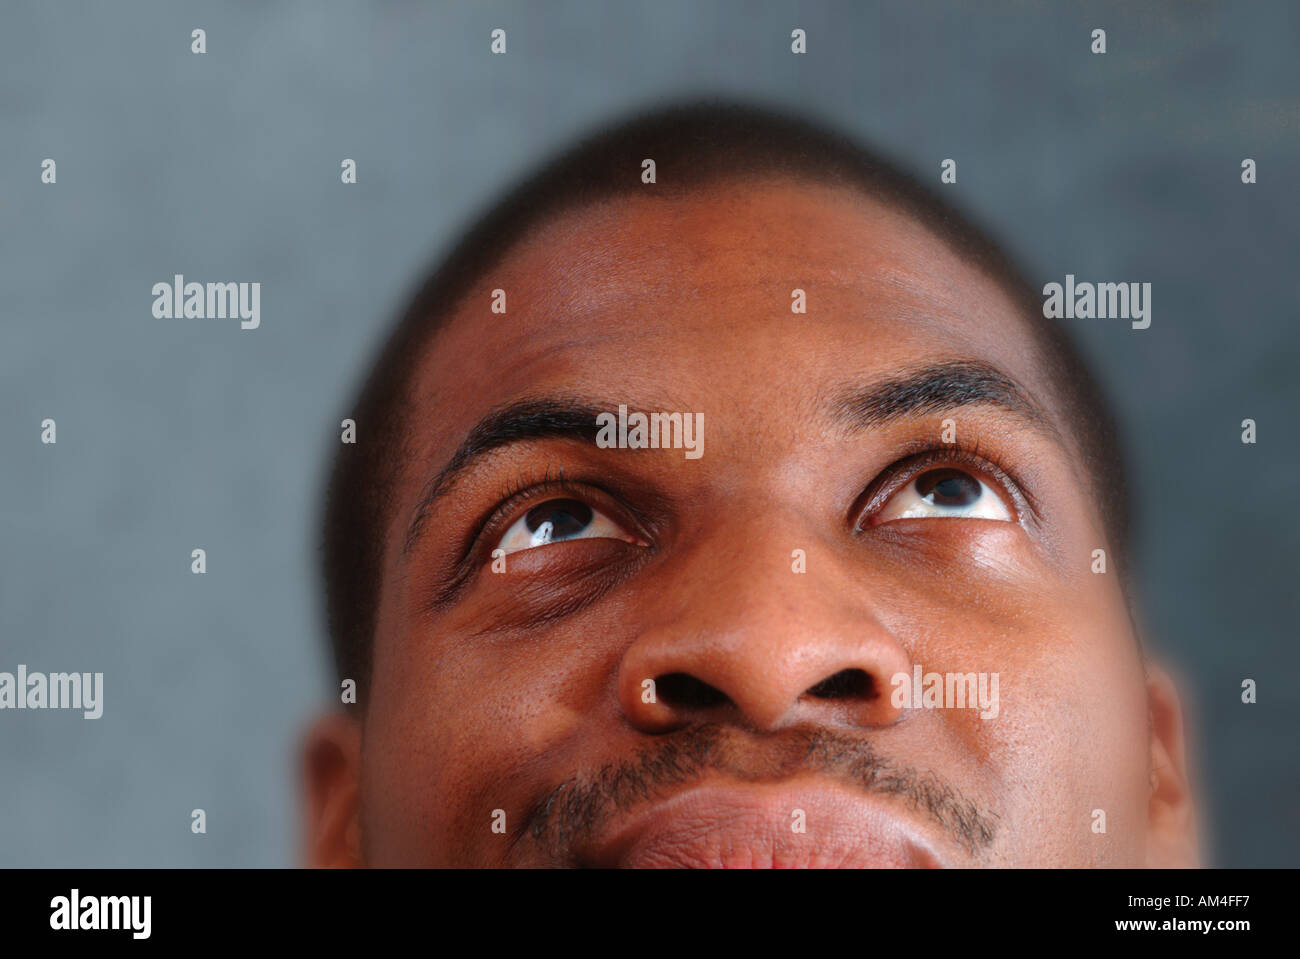 African American face looking up up-close and cropped Stock Photo - Alamy